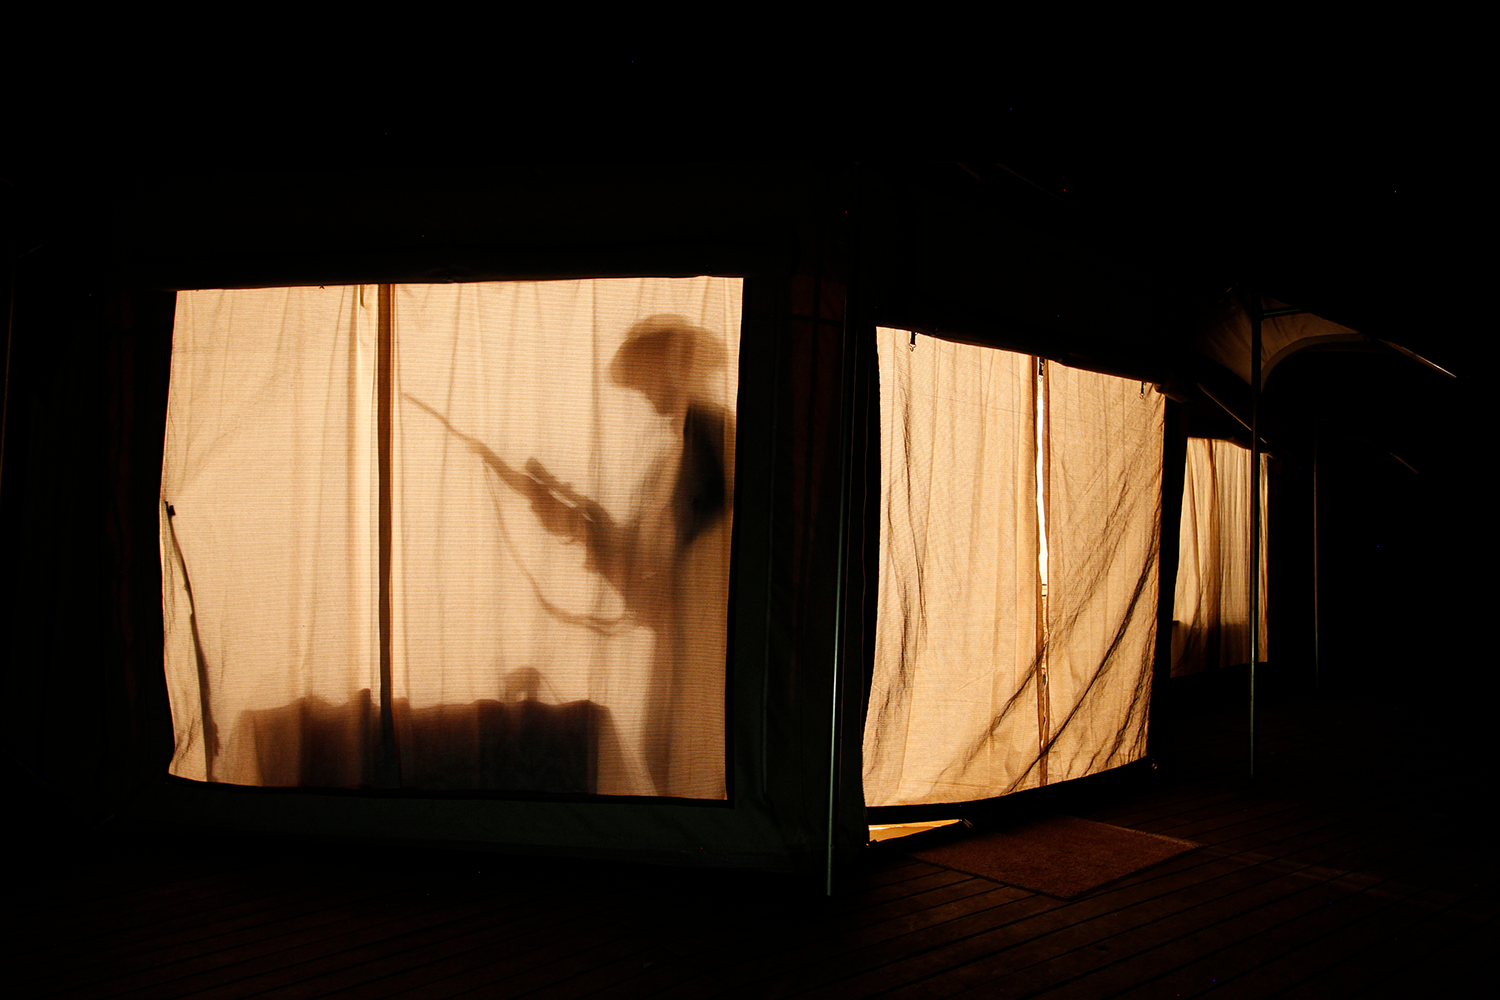 Silhouette shadow cast on the interior cloth wall of an African safari tent.